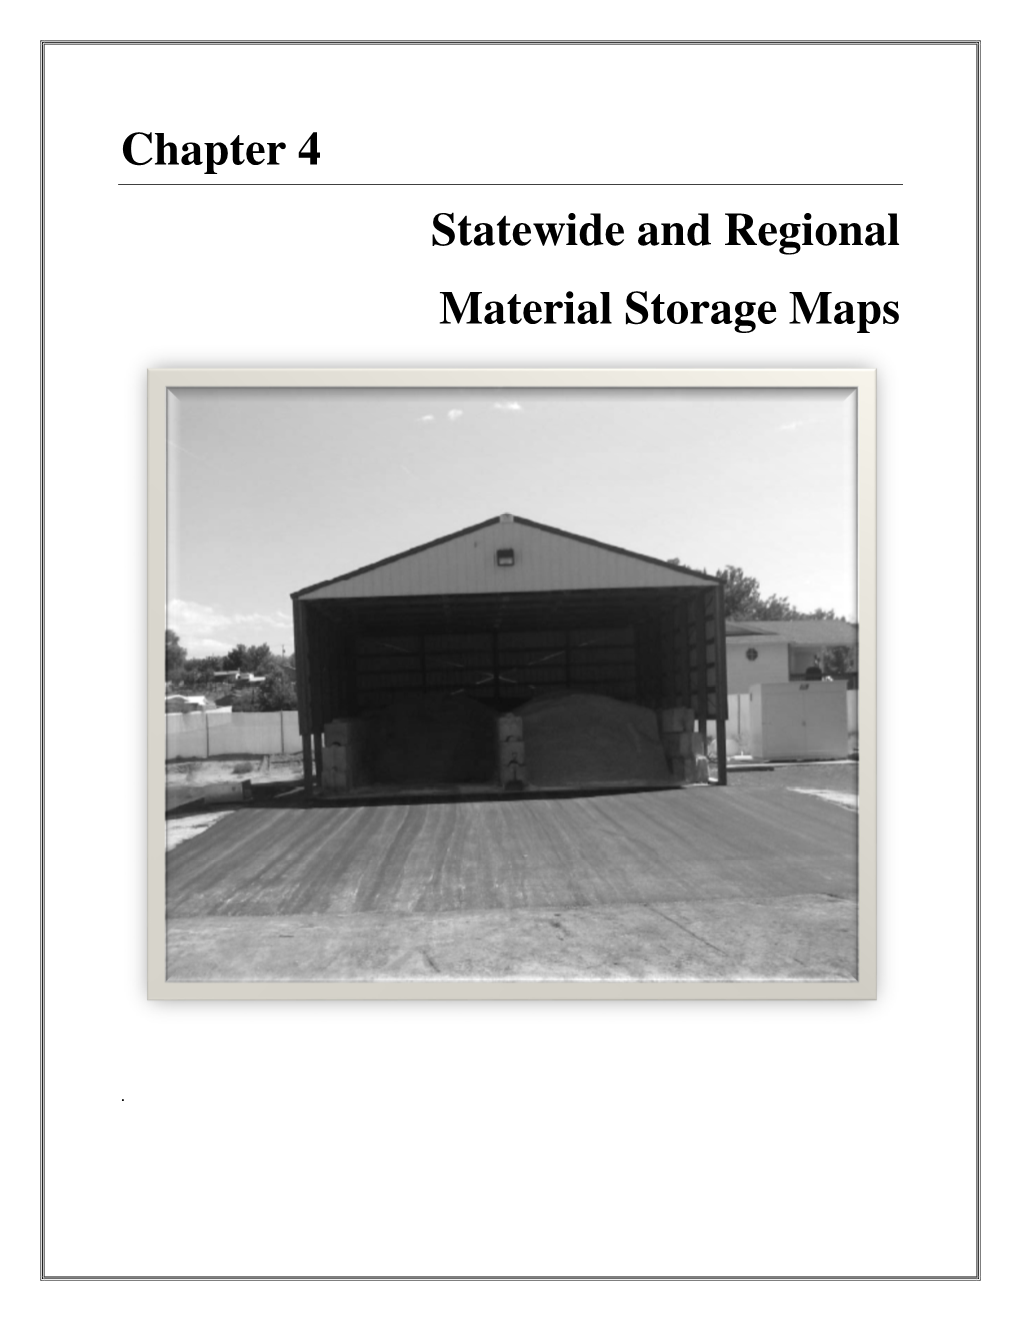 Chapter 4 Statewide and Regional Material Storage Maps